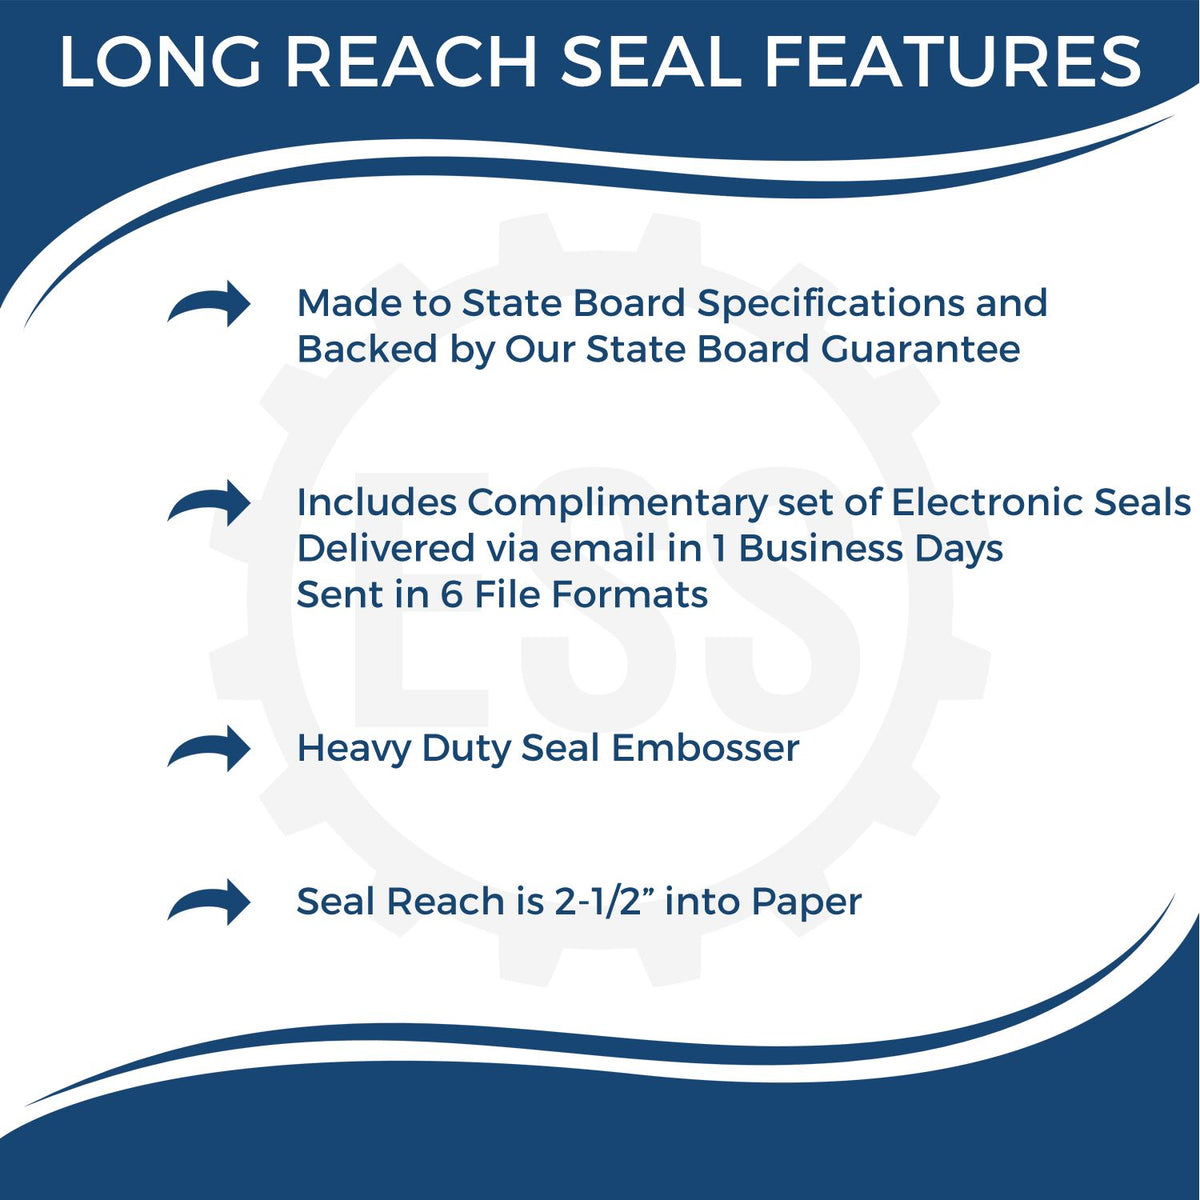 A picture of an infographic highlighting the selling points for the Long Reach New Jersey PE Seal